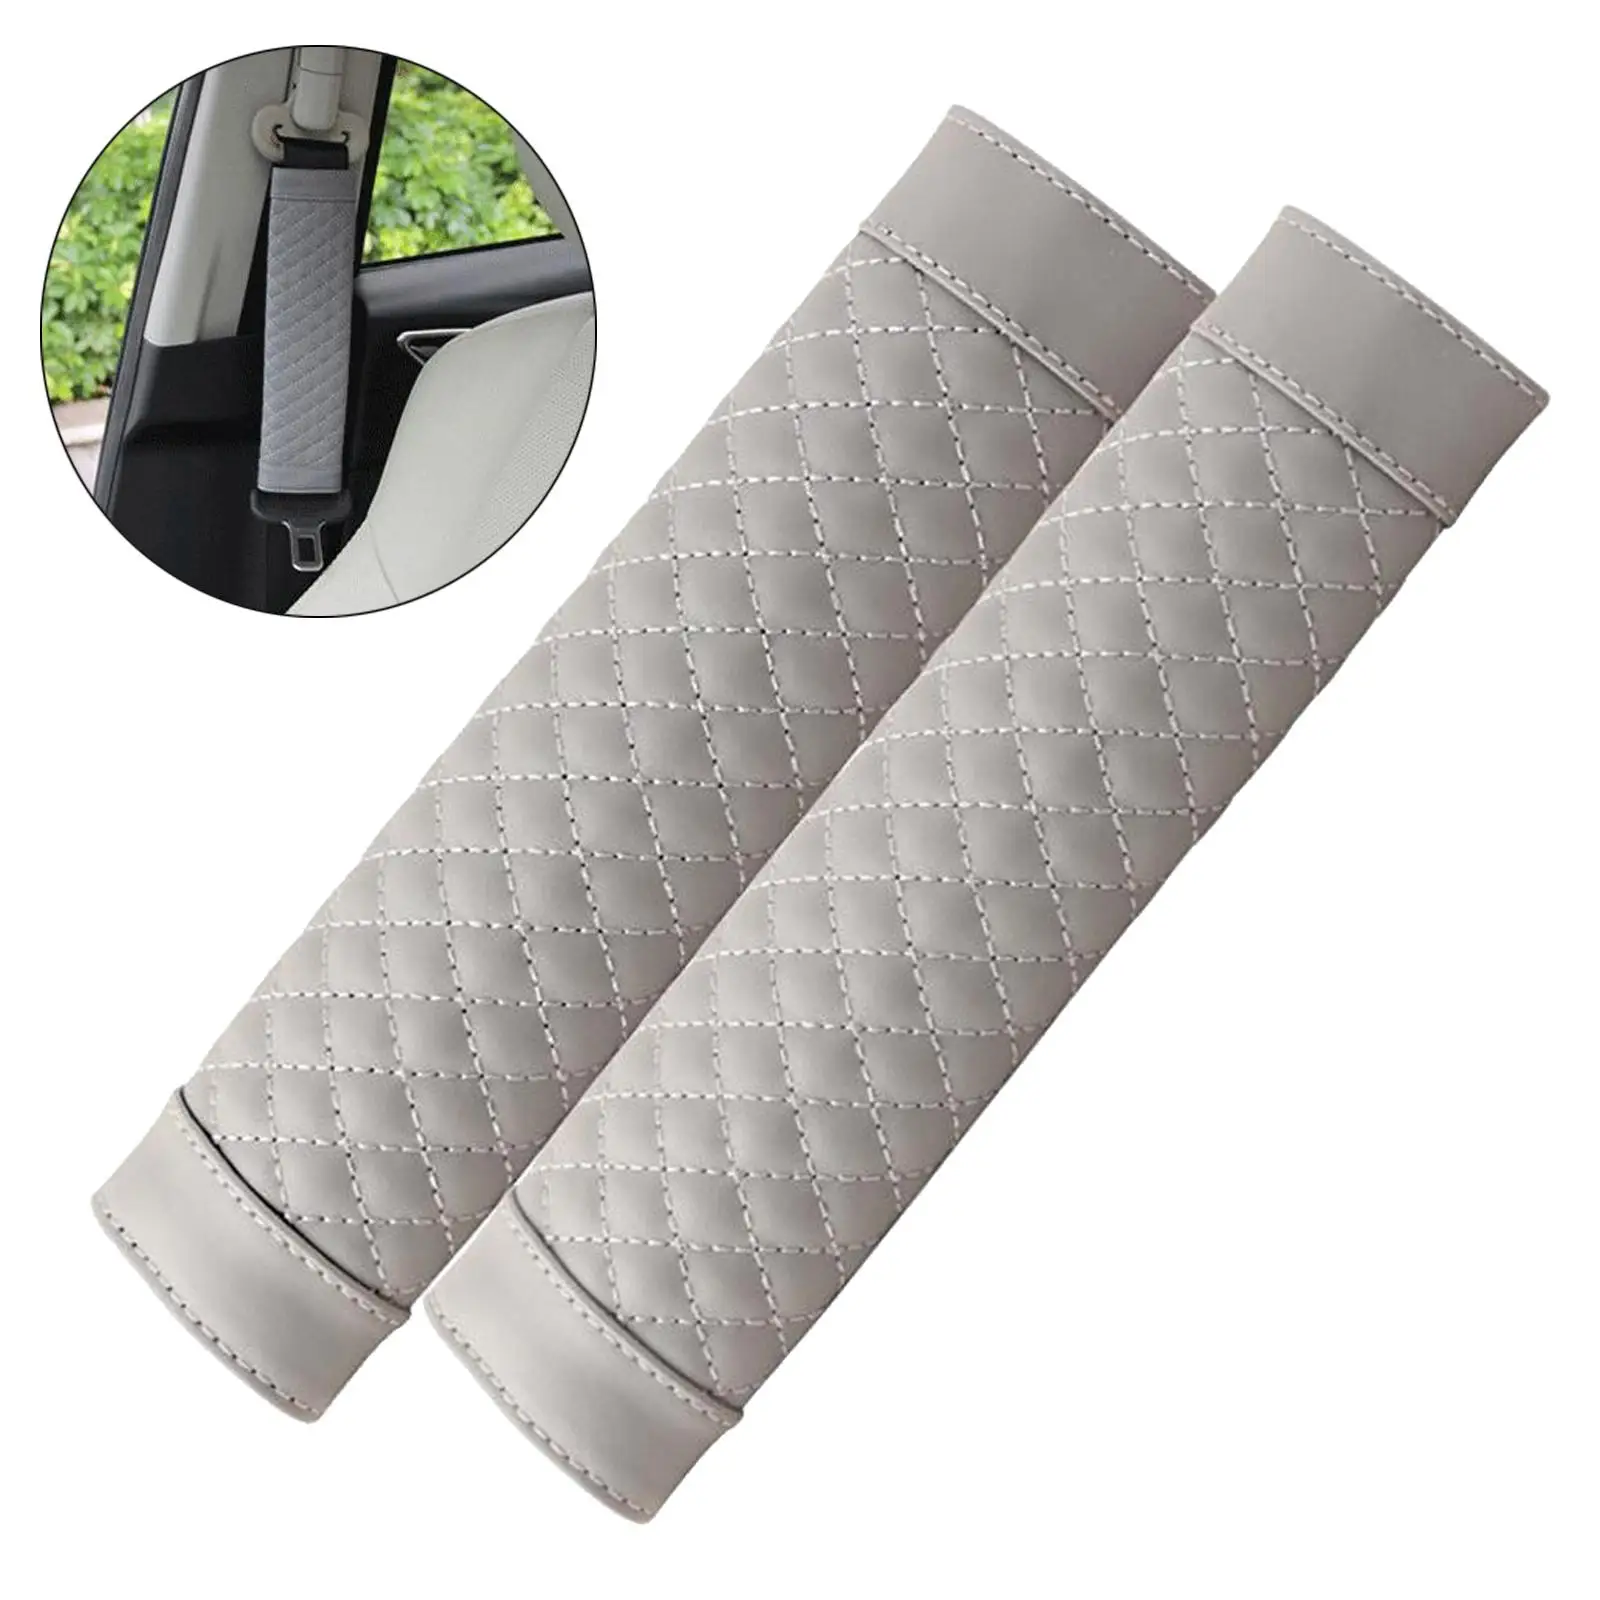 Soft   Shoulder Pad 2 PCS for a  Comfortable Driving  All Cars and Backpack